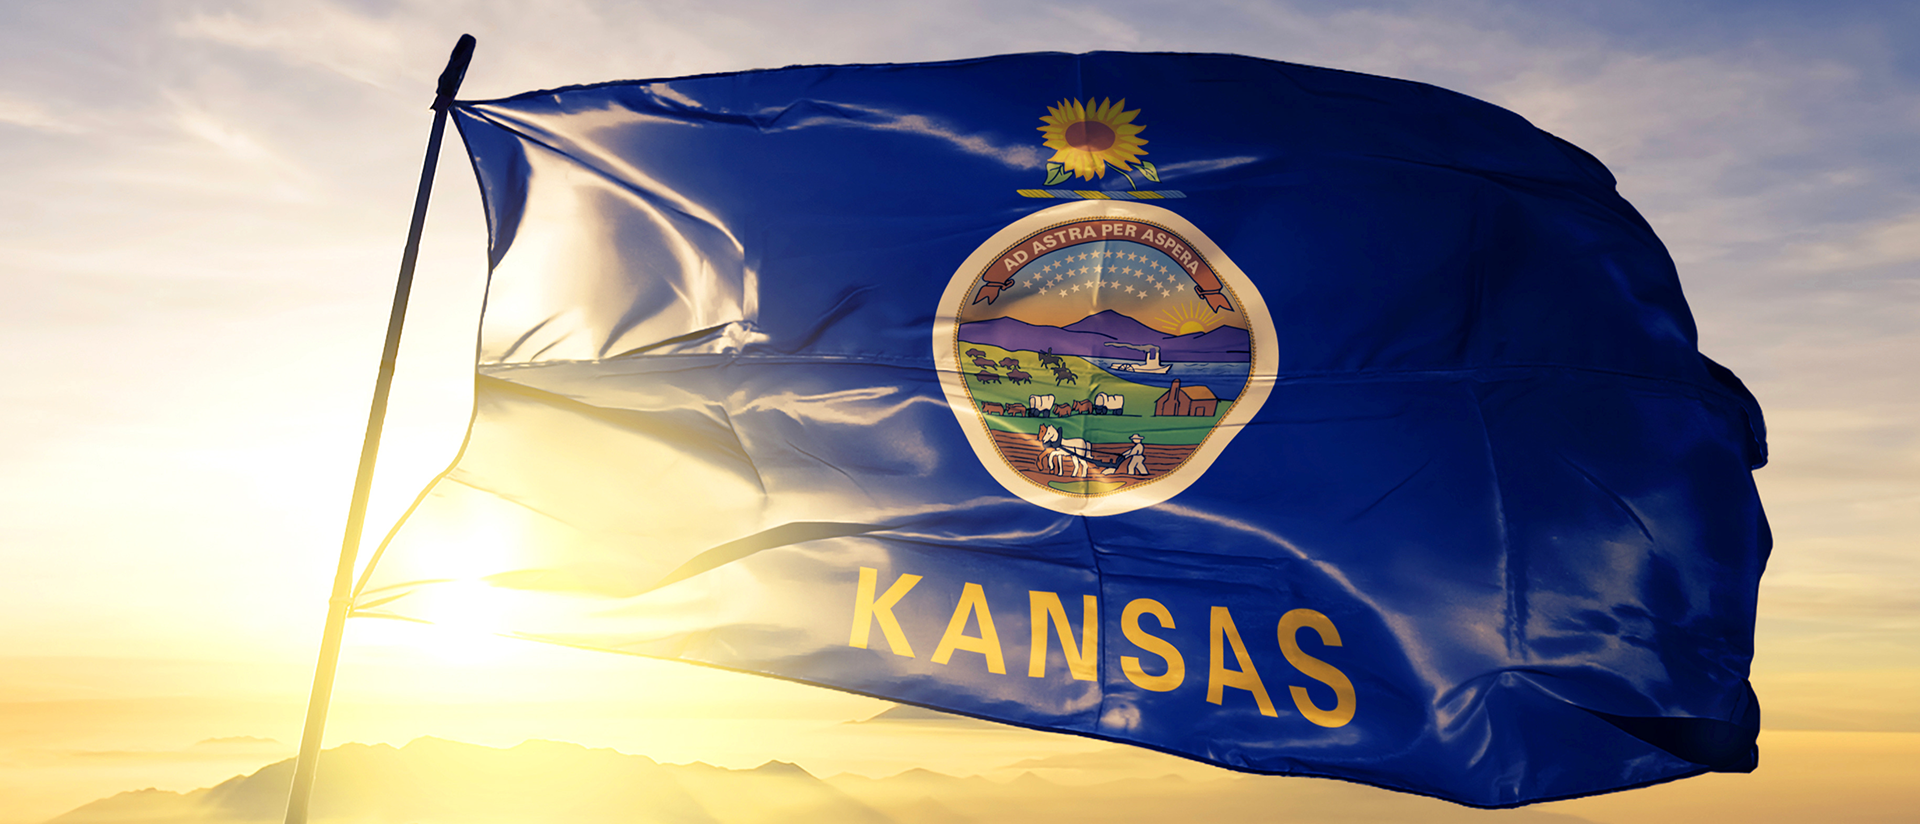 Kansas Flag blowing in the wind during sunset